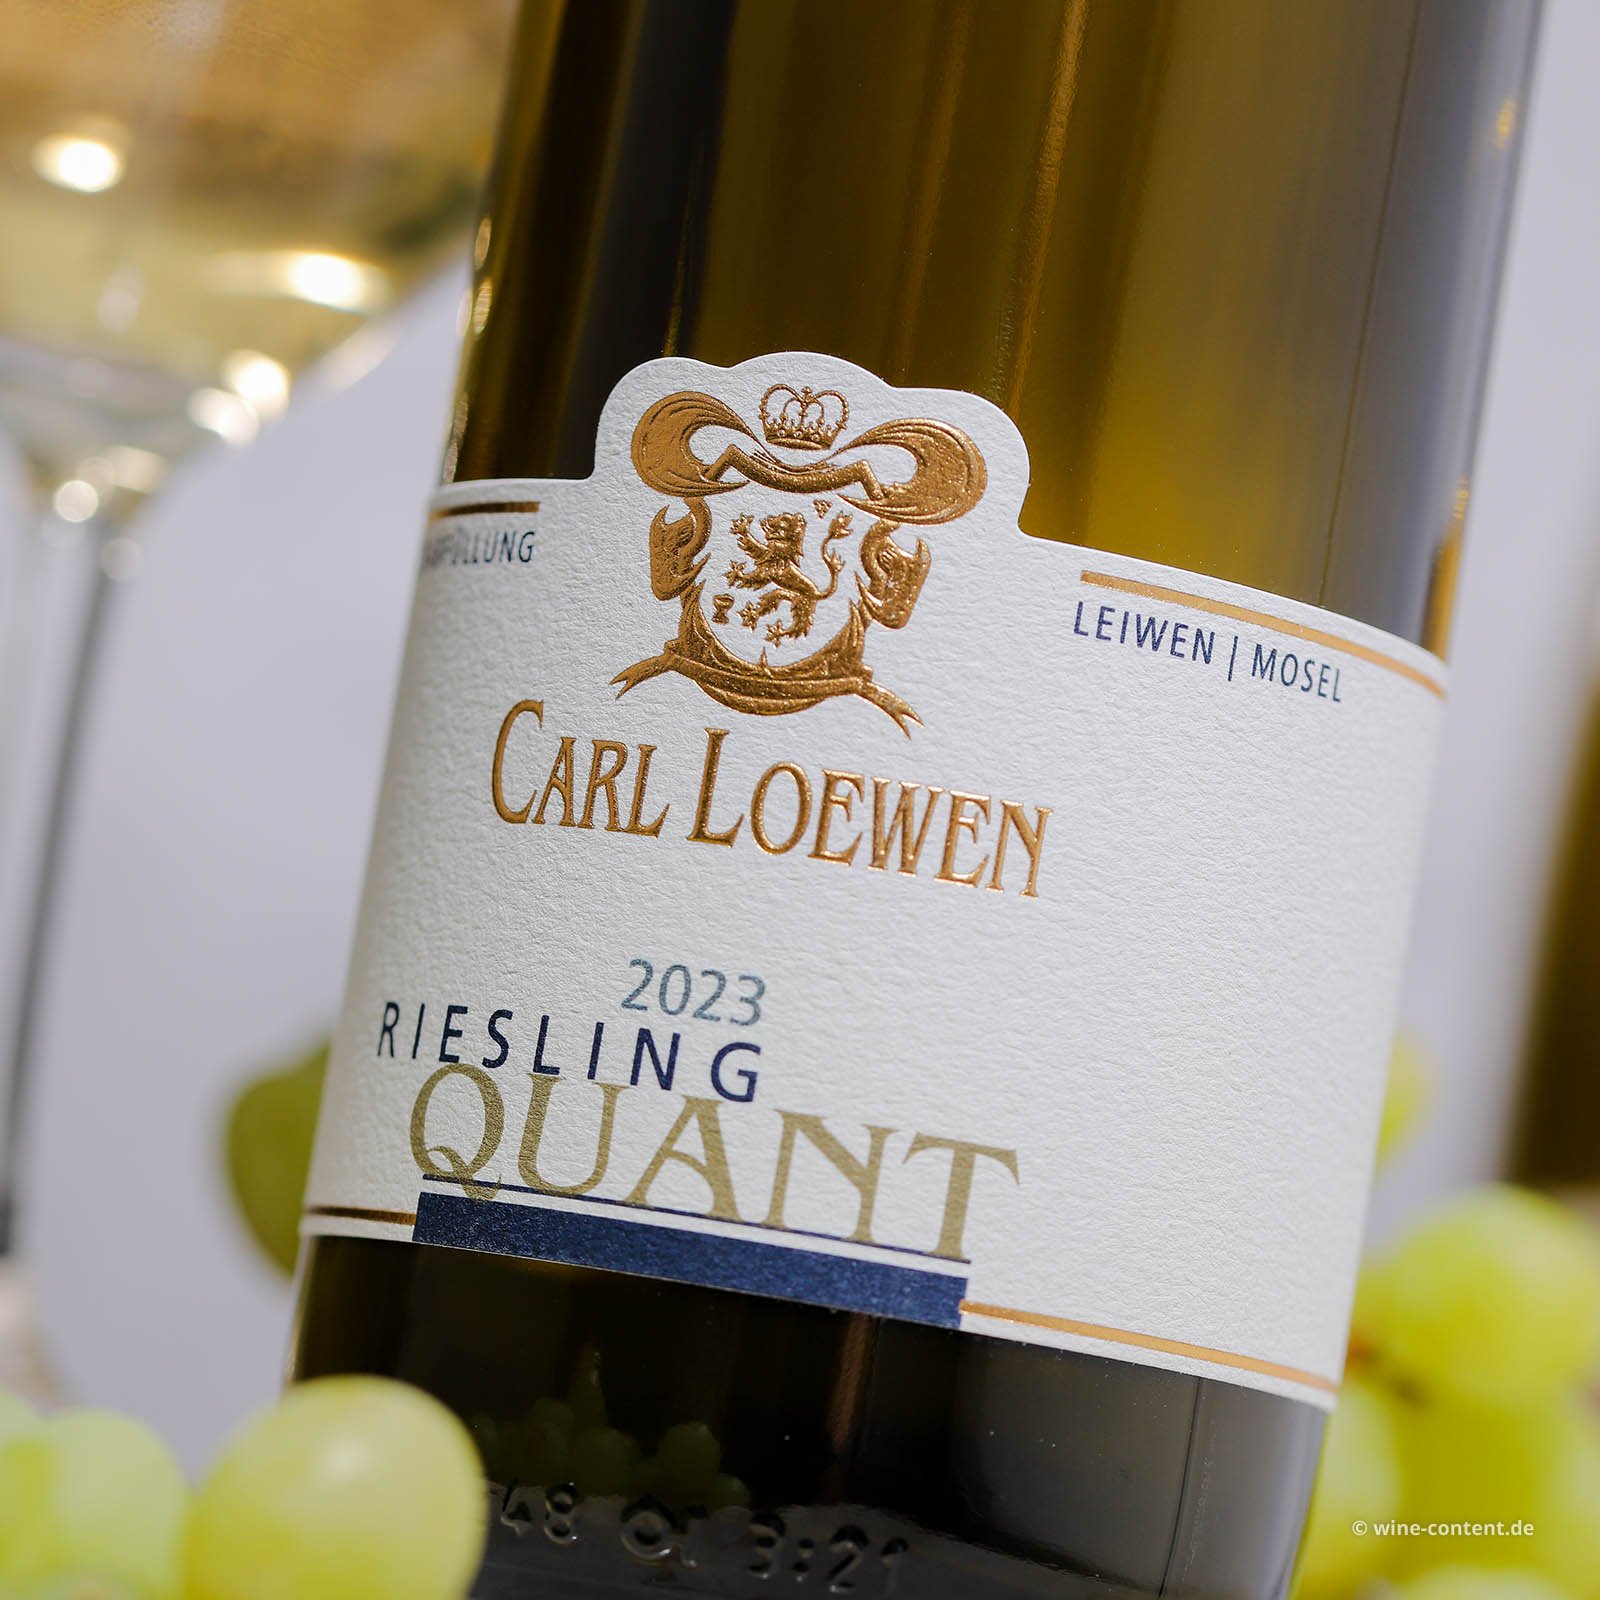 Riesling 2023 Quant